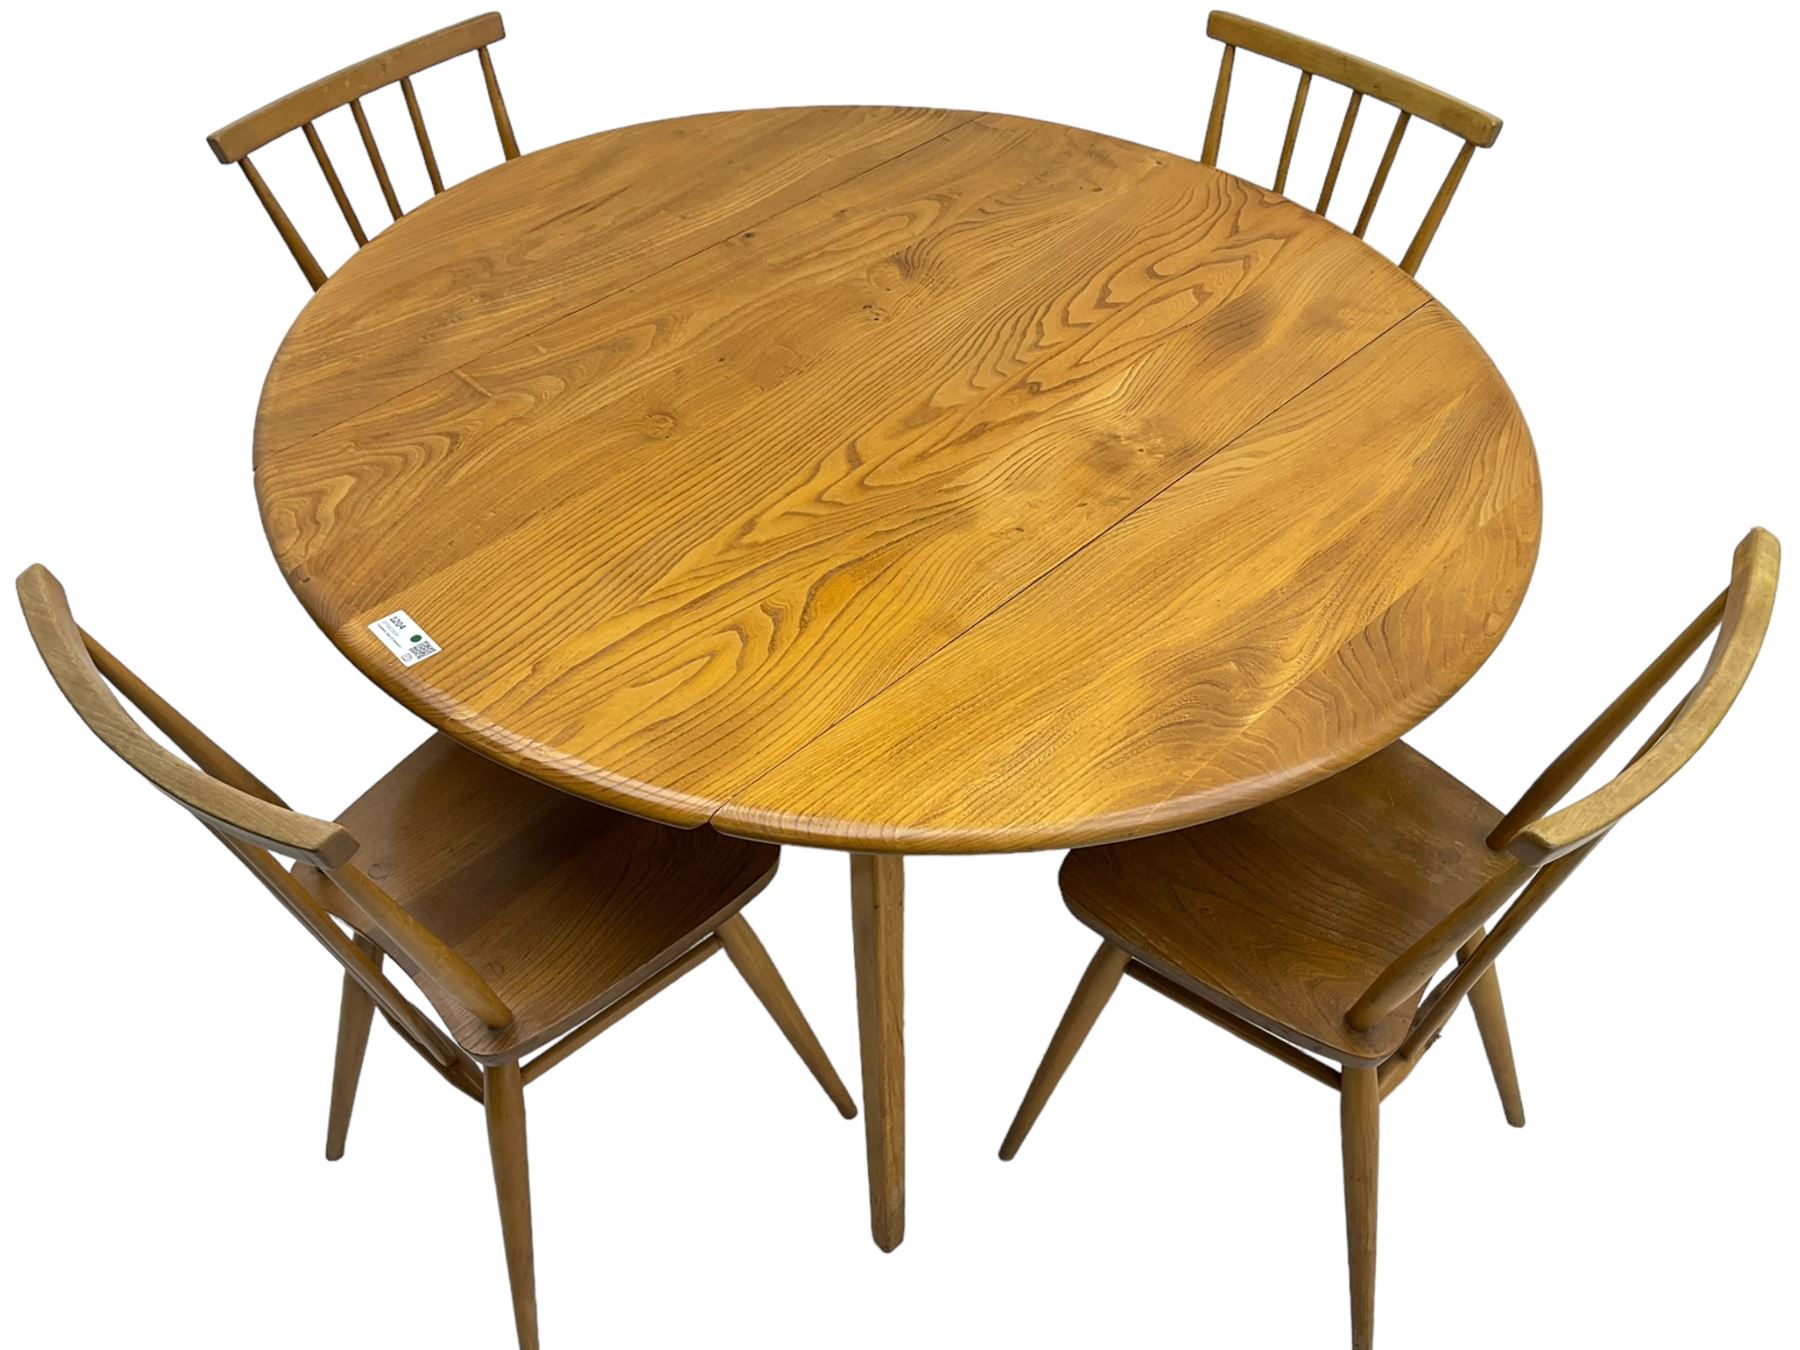 Ercol - elm and beech dining table - Image 2 of 6